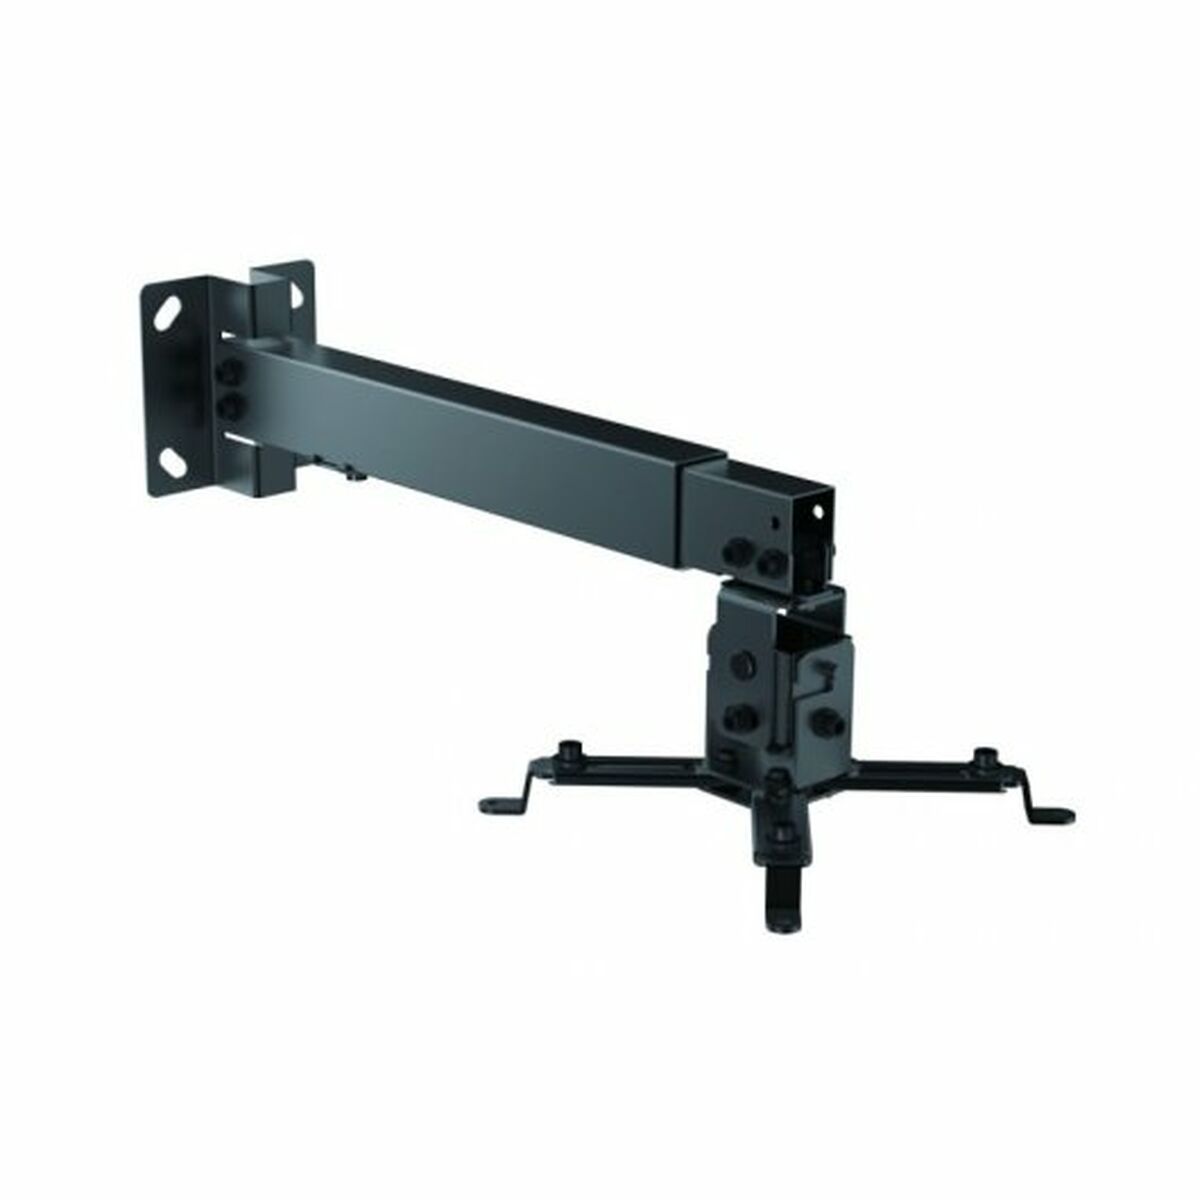 Tilt and Swivel Ceiling Mount for Projectors Equip 650702, Equip, Electronics, TV, Video and home cinema, tilt-and-swivel-ceiling-mount-for-projectors-equip-650702, Brand_Equip, category-reference-2609, category-reference-2642, category-reference-2947, category-reference-t-18805, category-reference-t-19653, category-reference-t-19921, category-reference-t-21391, category-reference-t-25701, cinema and television, computers / peripherals, Condition_NEW, entertainment, office, Price_20 - 50, RiotNook